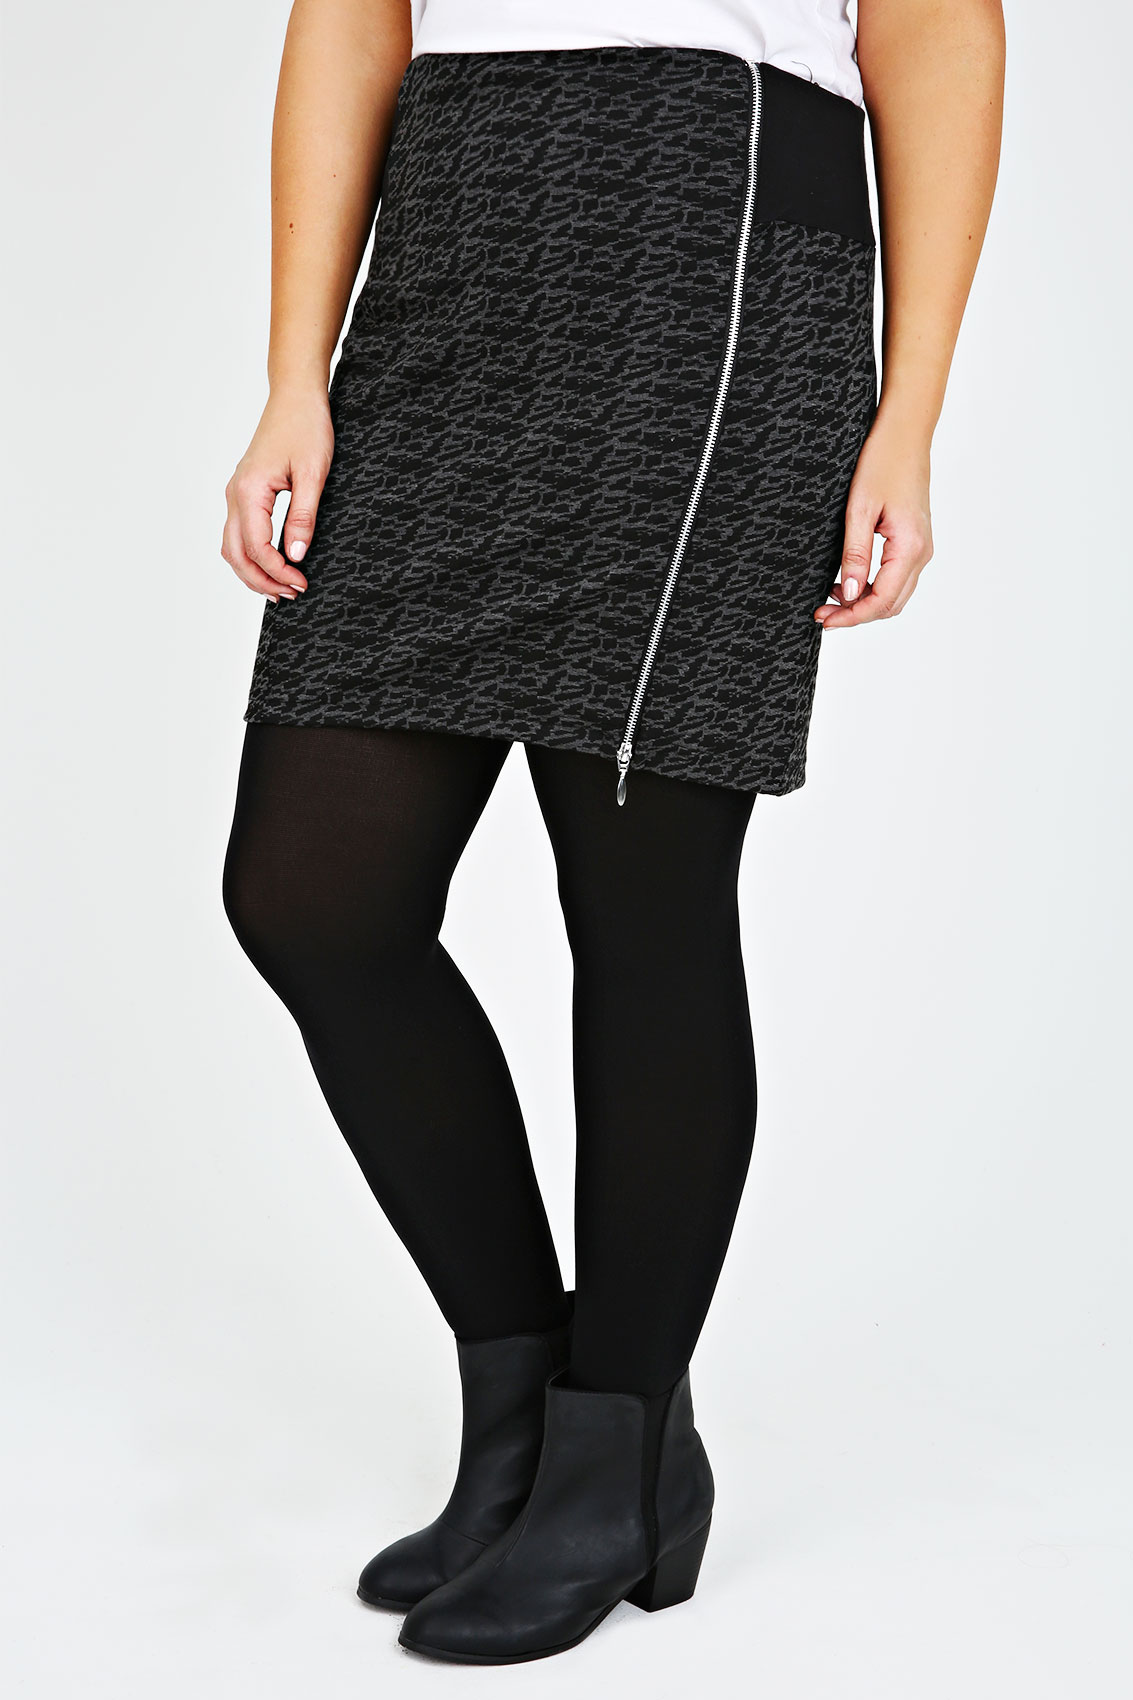  Charcoal  Grey  Jacquard Print Pull On Short Skirt  With Zip 